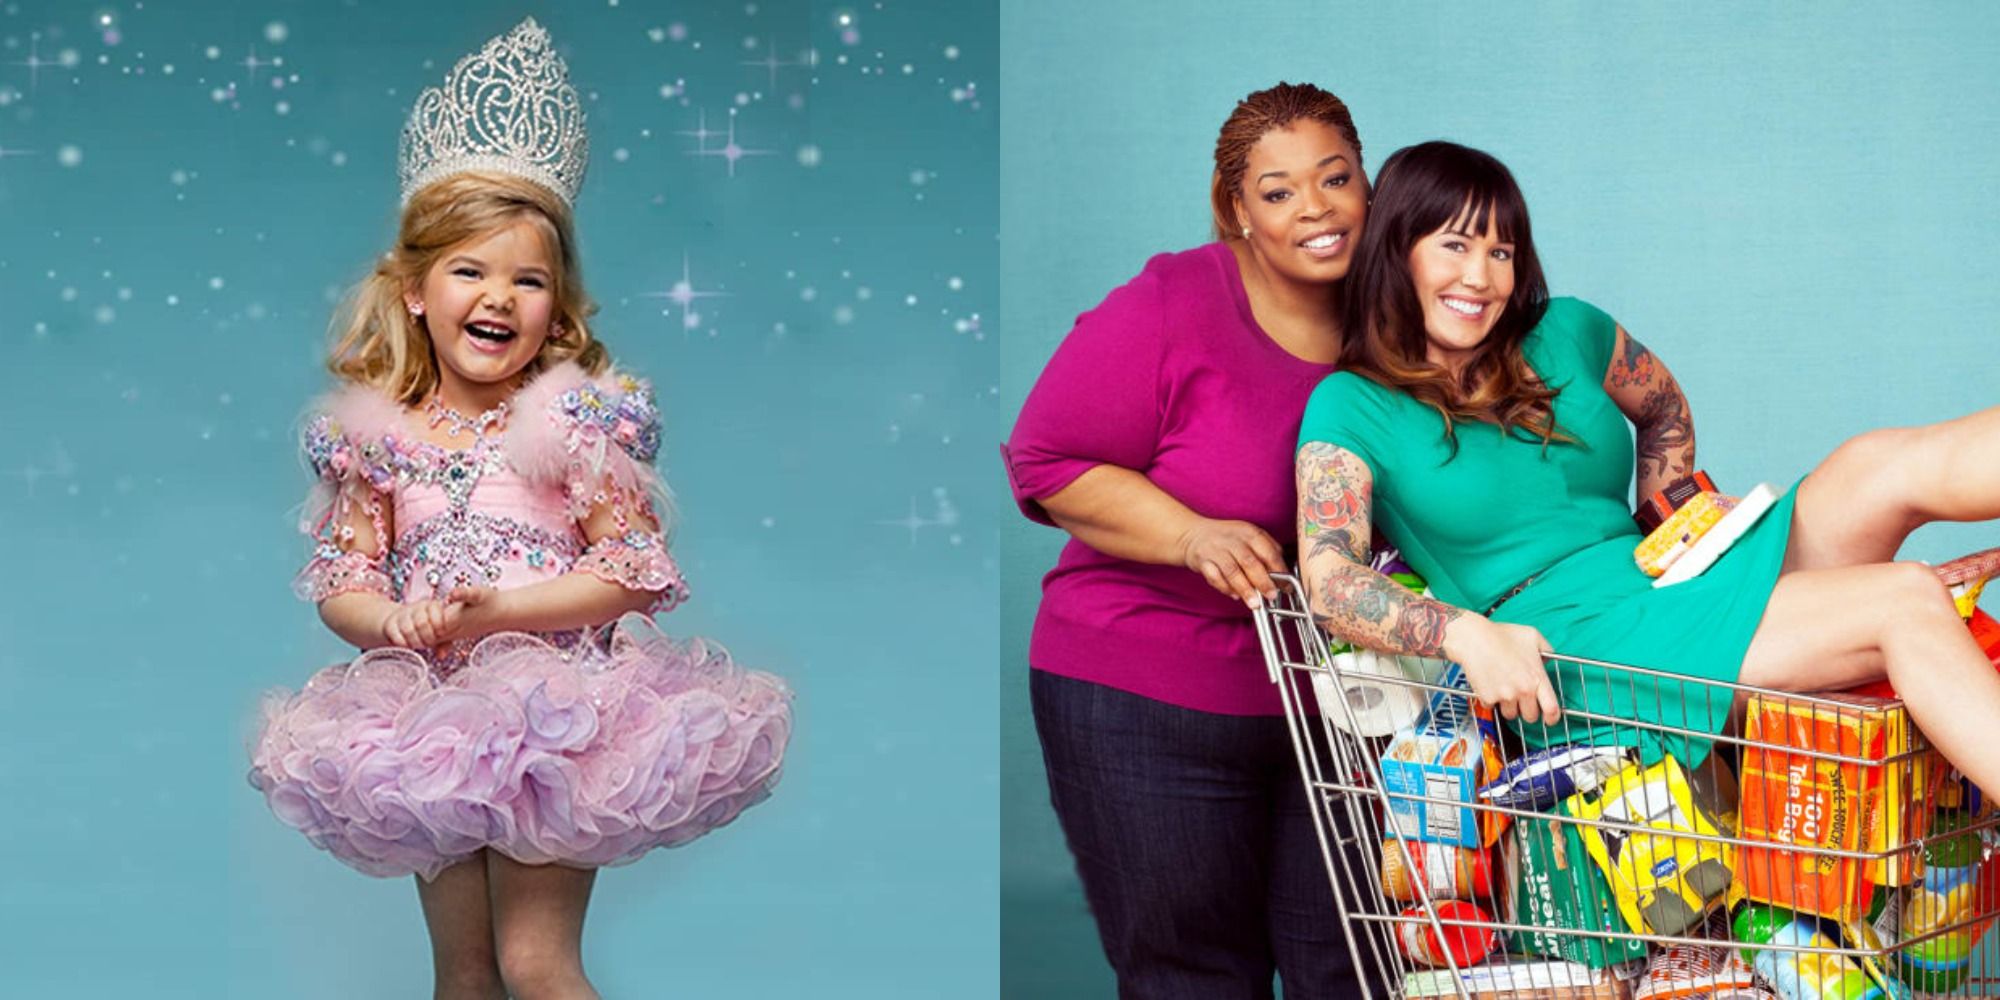 Split image showing posters for the TLC shows Toddlers & Tiaras and Extreme Couponing